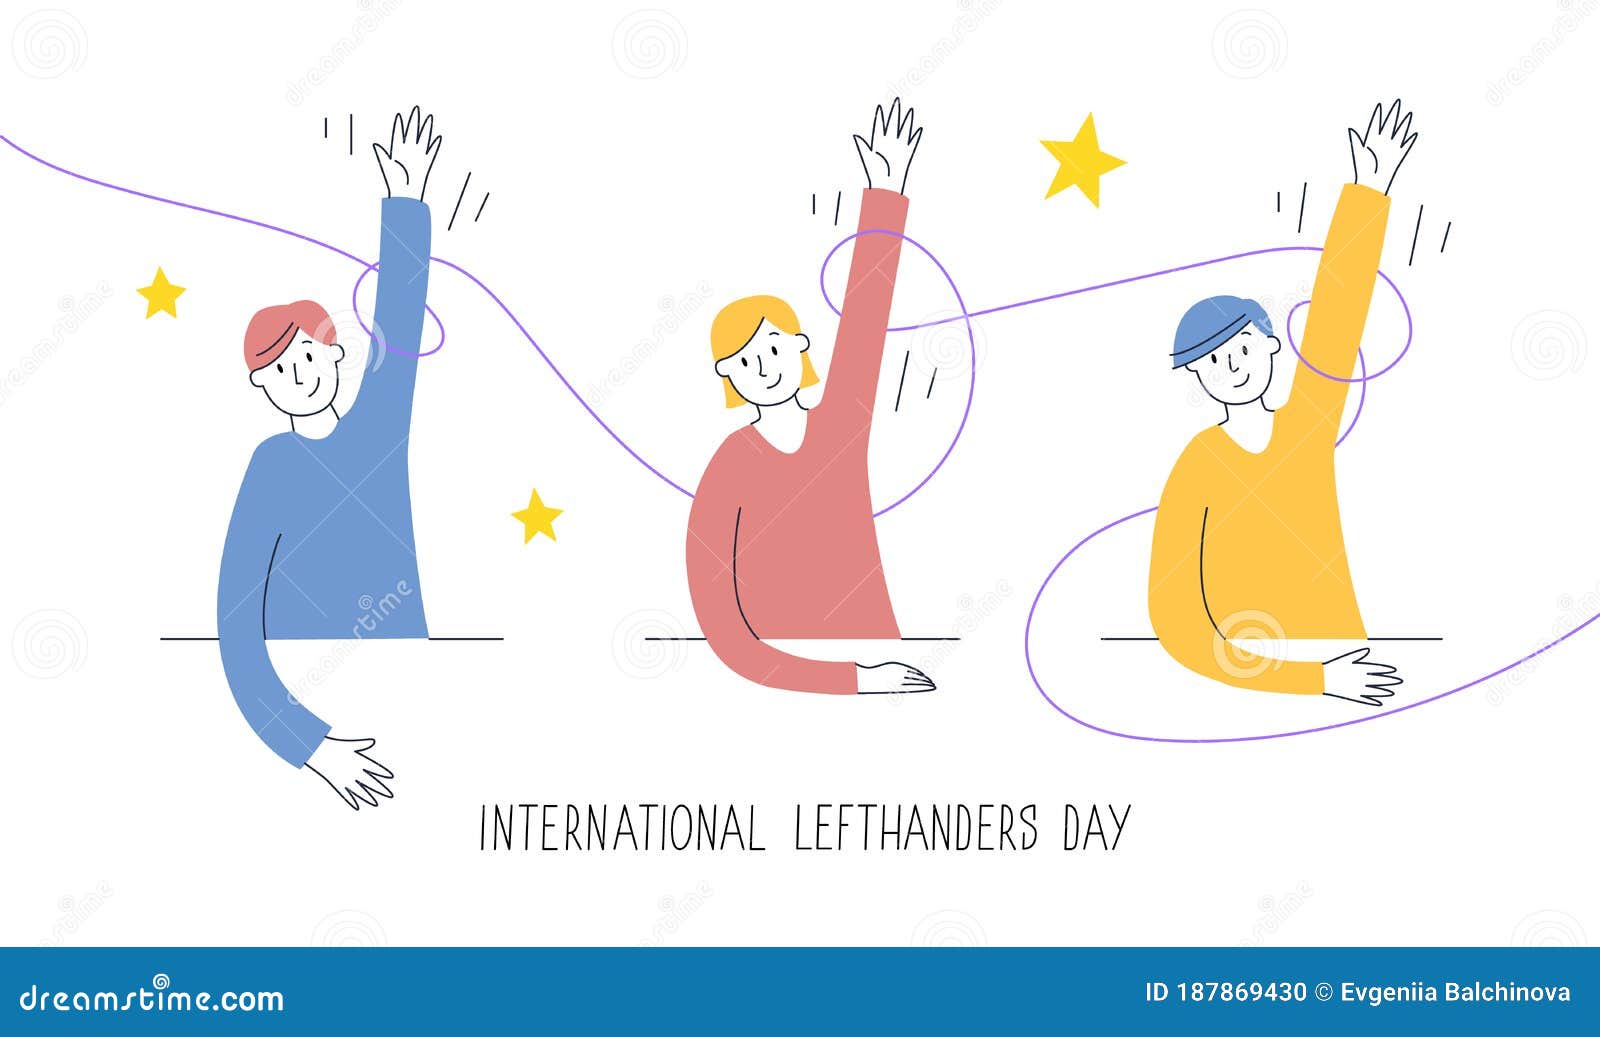 happy left-handers day greeting card. congratulate your lefty friend. august 13, international lefthanders day.